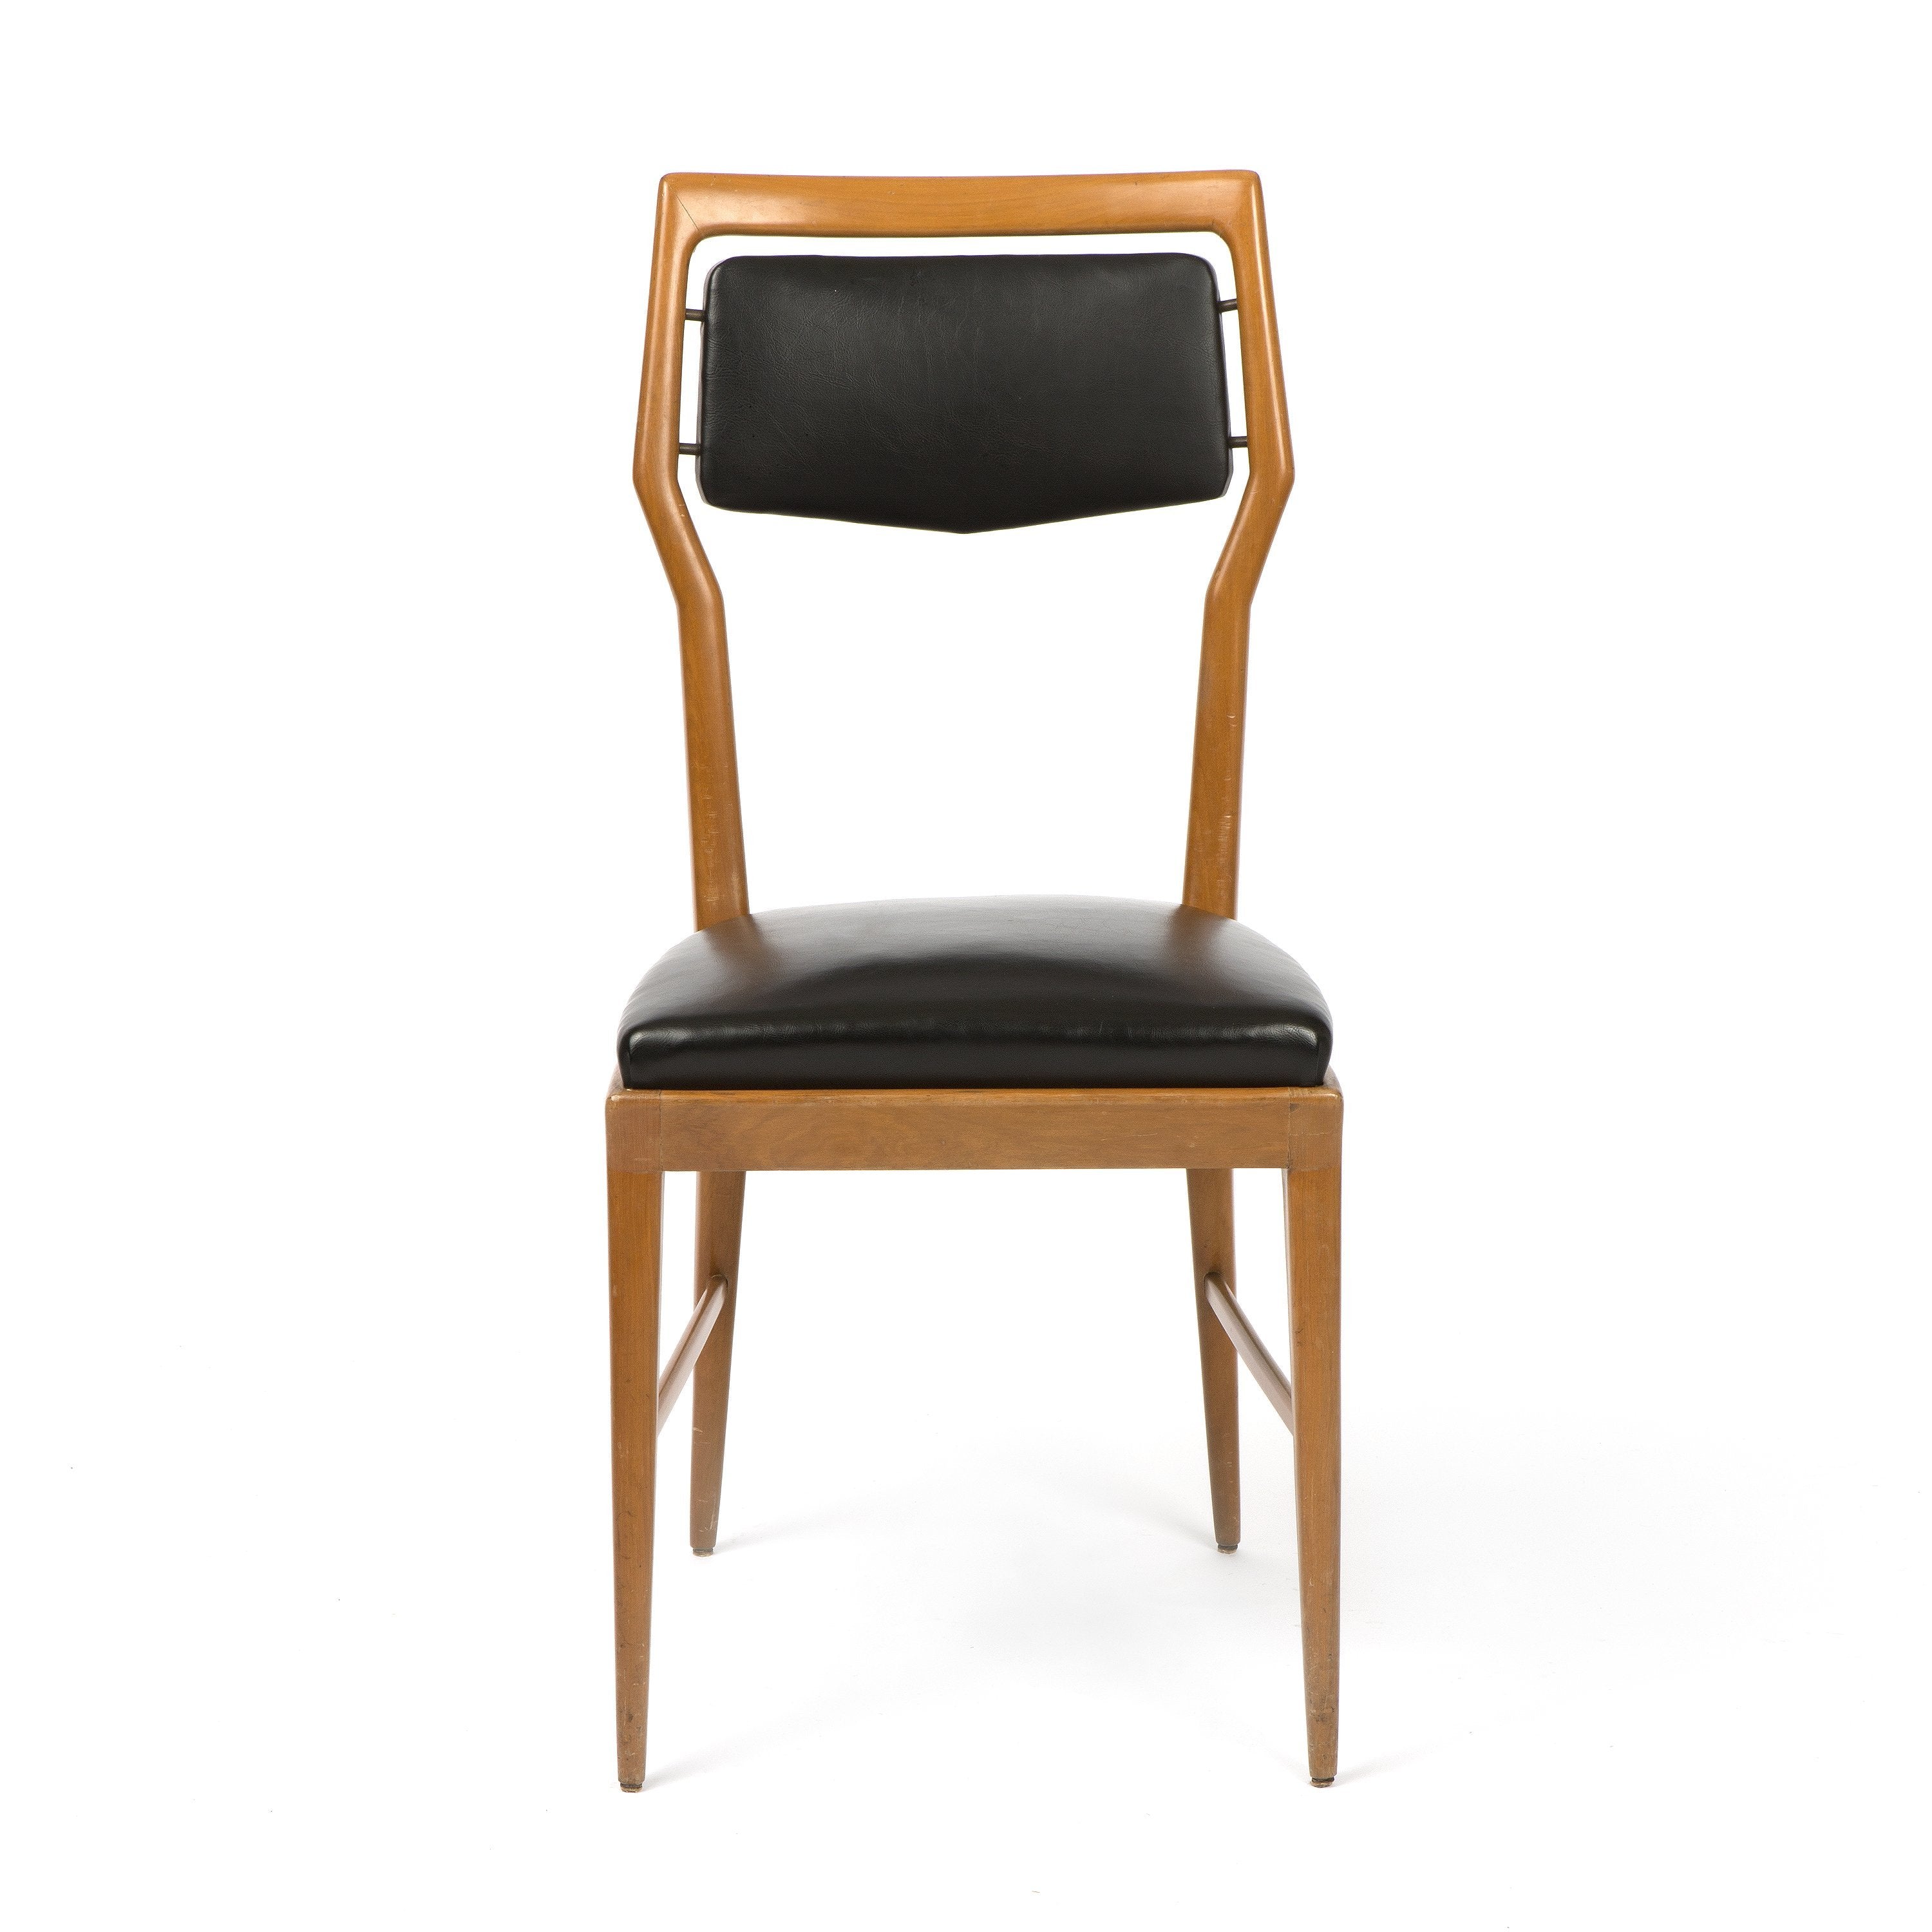 A set of 6 dining chairs, Moscatelli, 1950s - ONEROOM